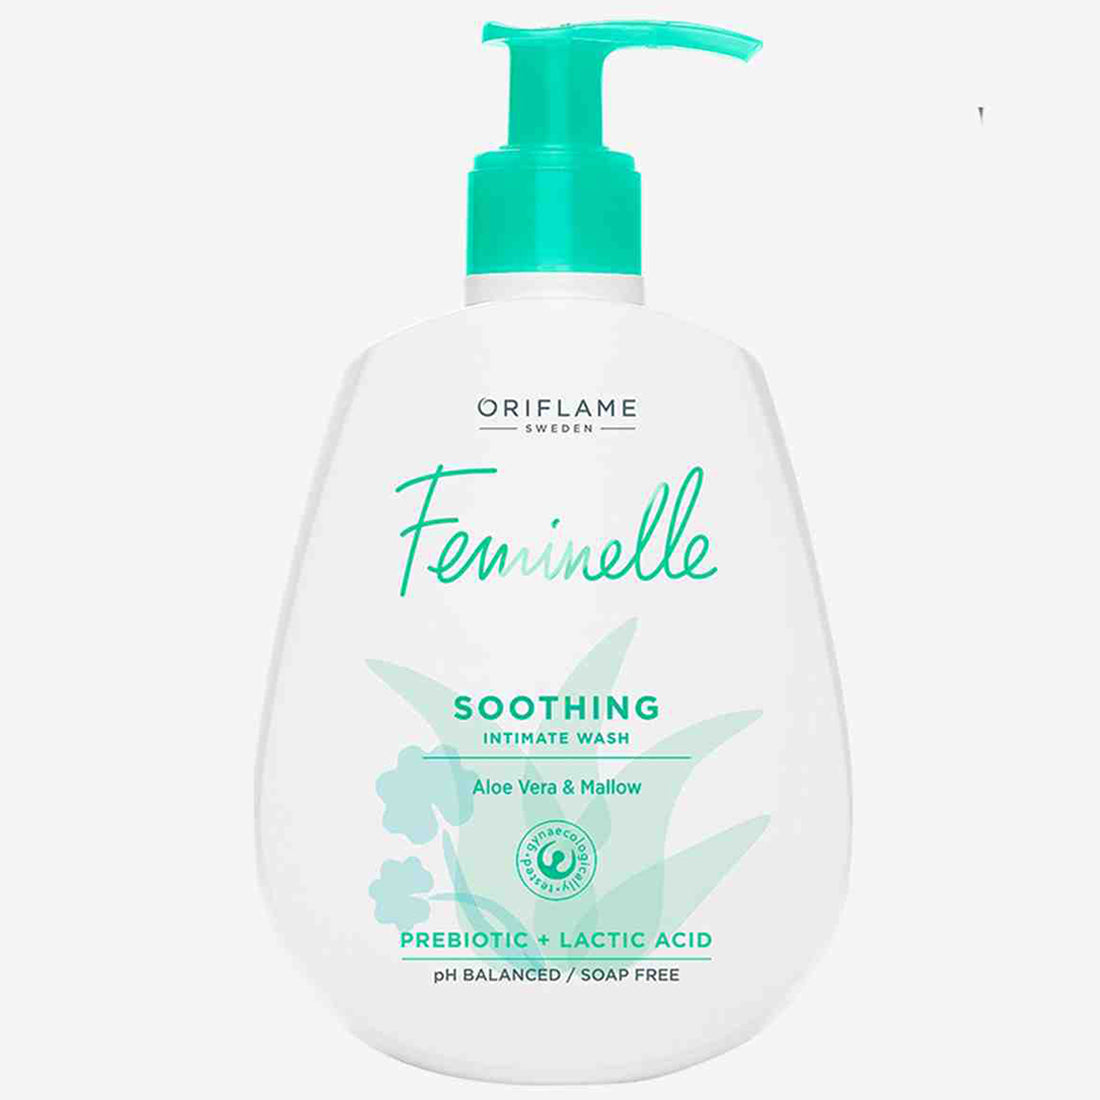 Oriflame Feminelle Soothing Intimate Wash 300ml